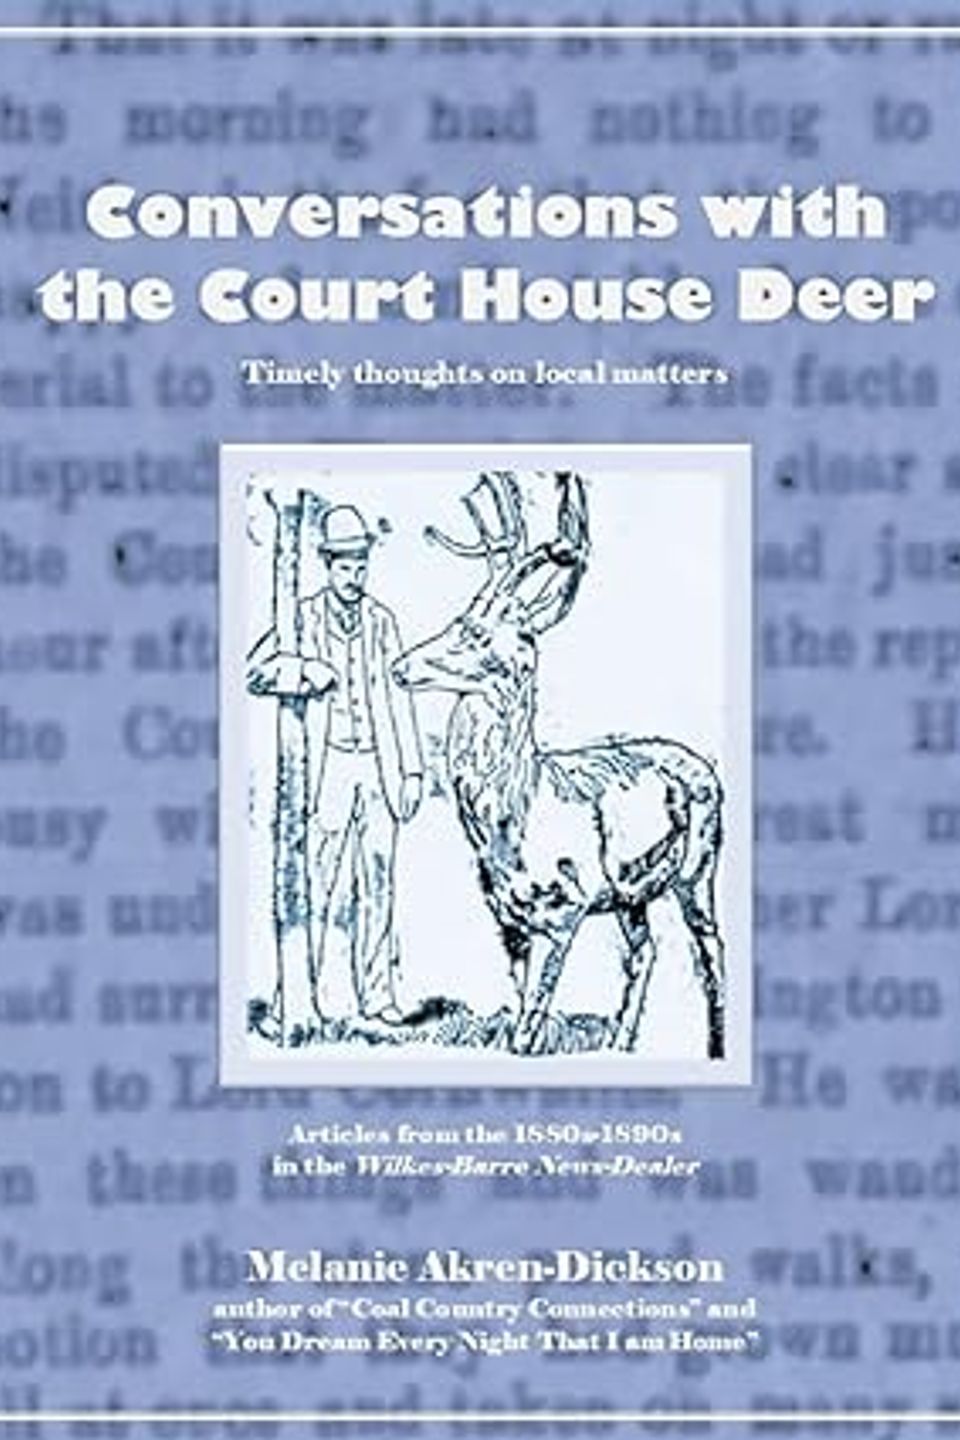 Conversations with the court house deer